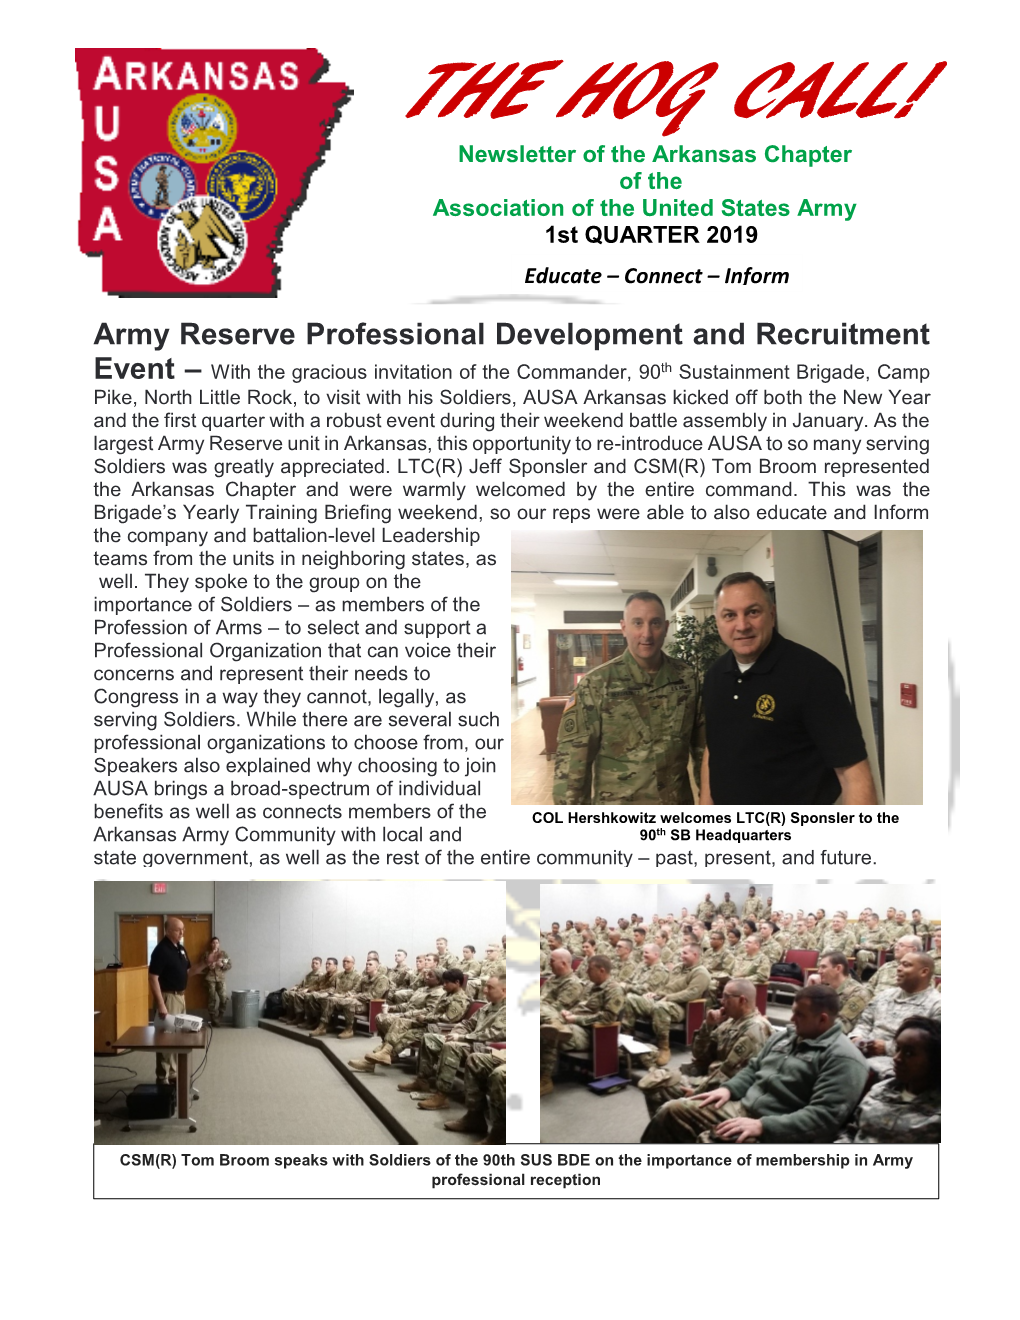 THE HOG CALL! Newsletter of the Arkansas Chapter of the Association of the United States Army 1St QUARTER 2019